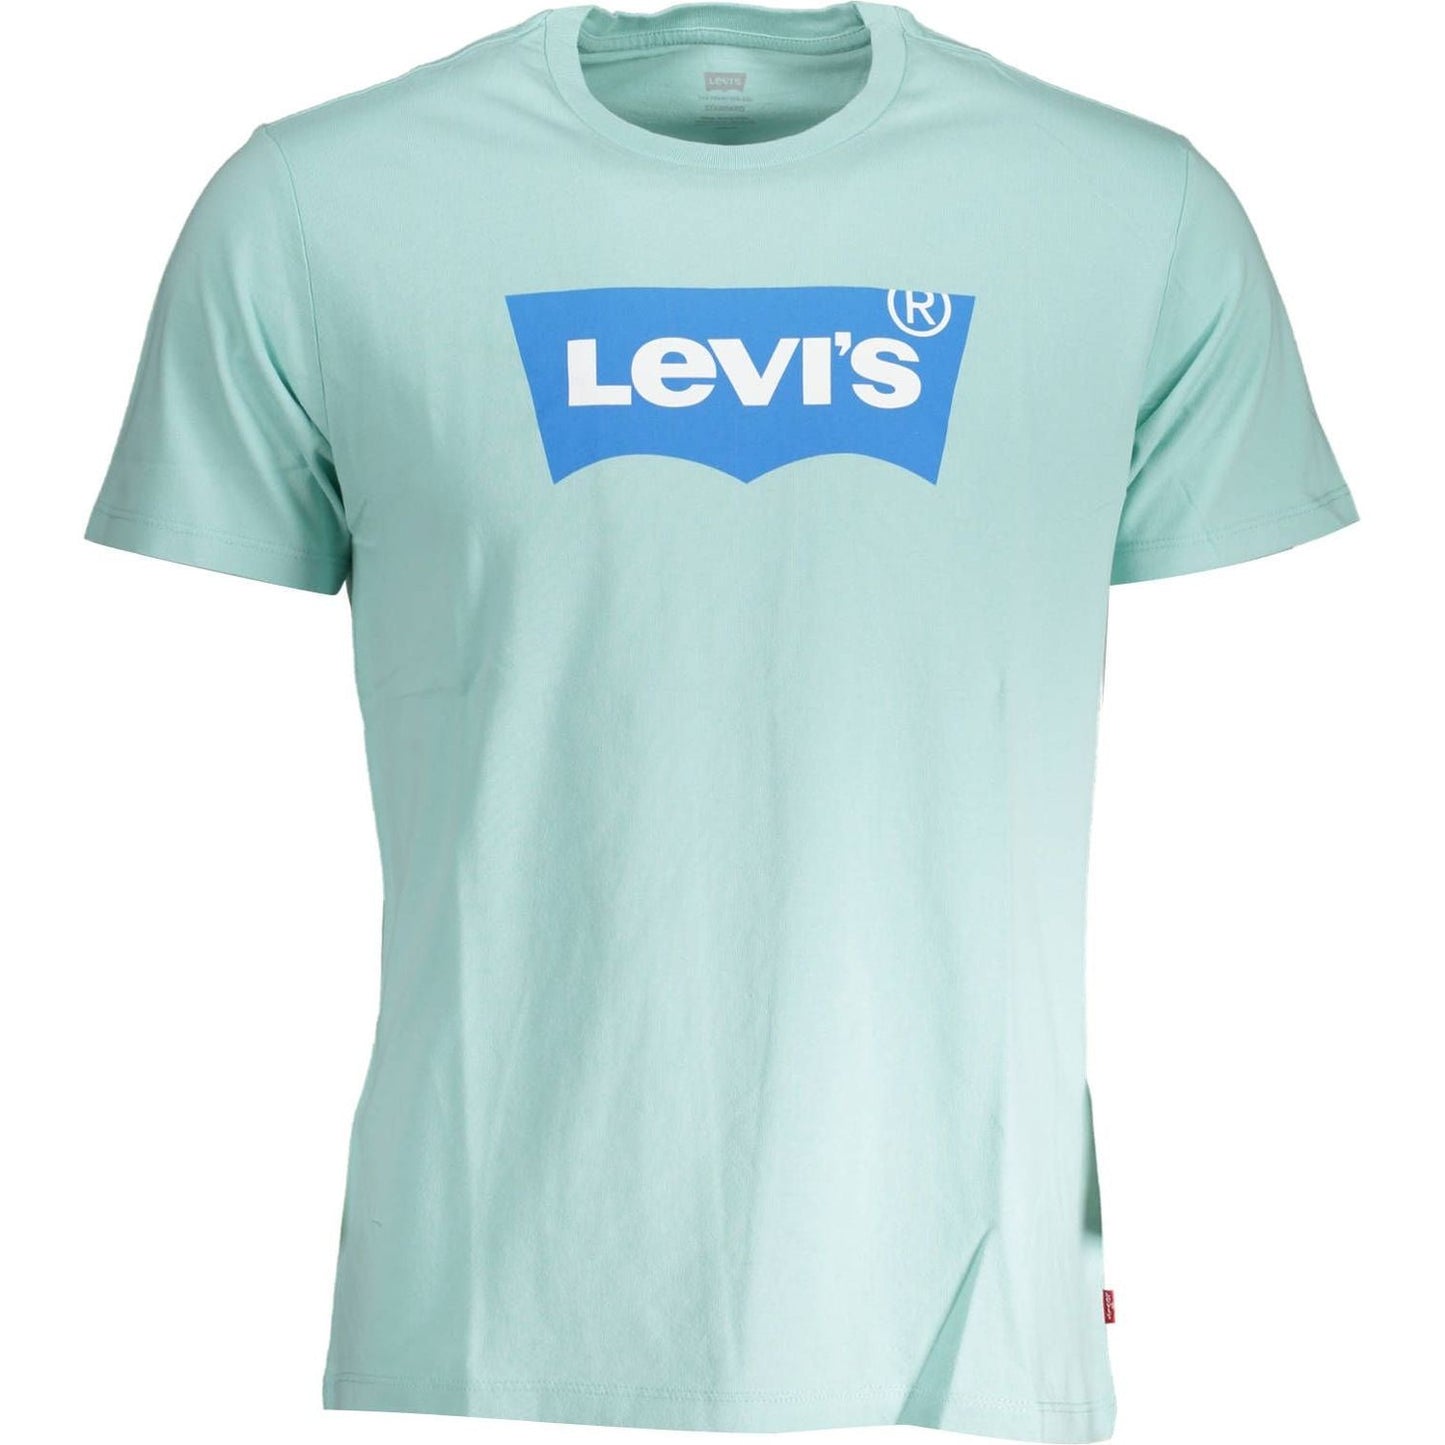 Levi's Classic Light Blue Cotton Tee - Perfect Everyday Style classic-light-blue-cotton-tee-perfect-everyday-style